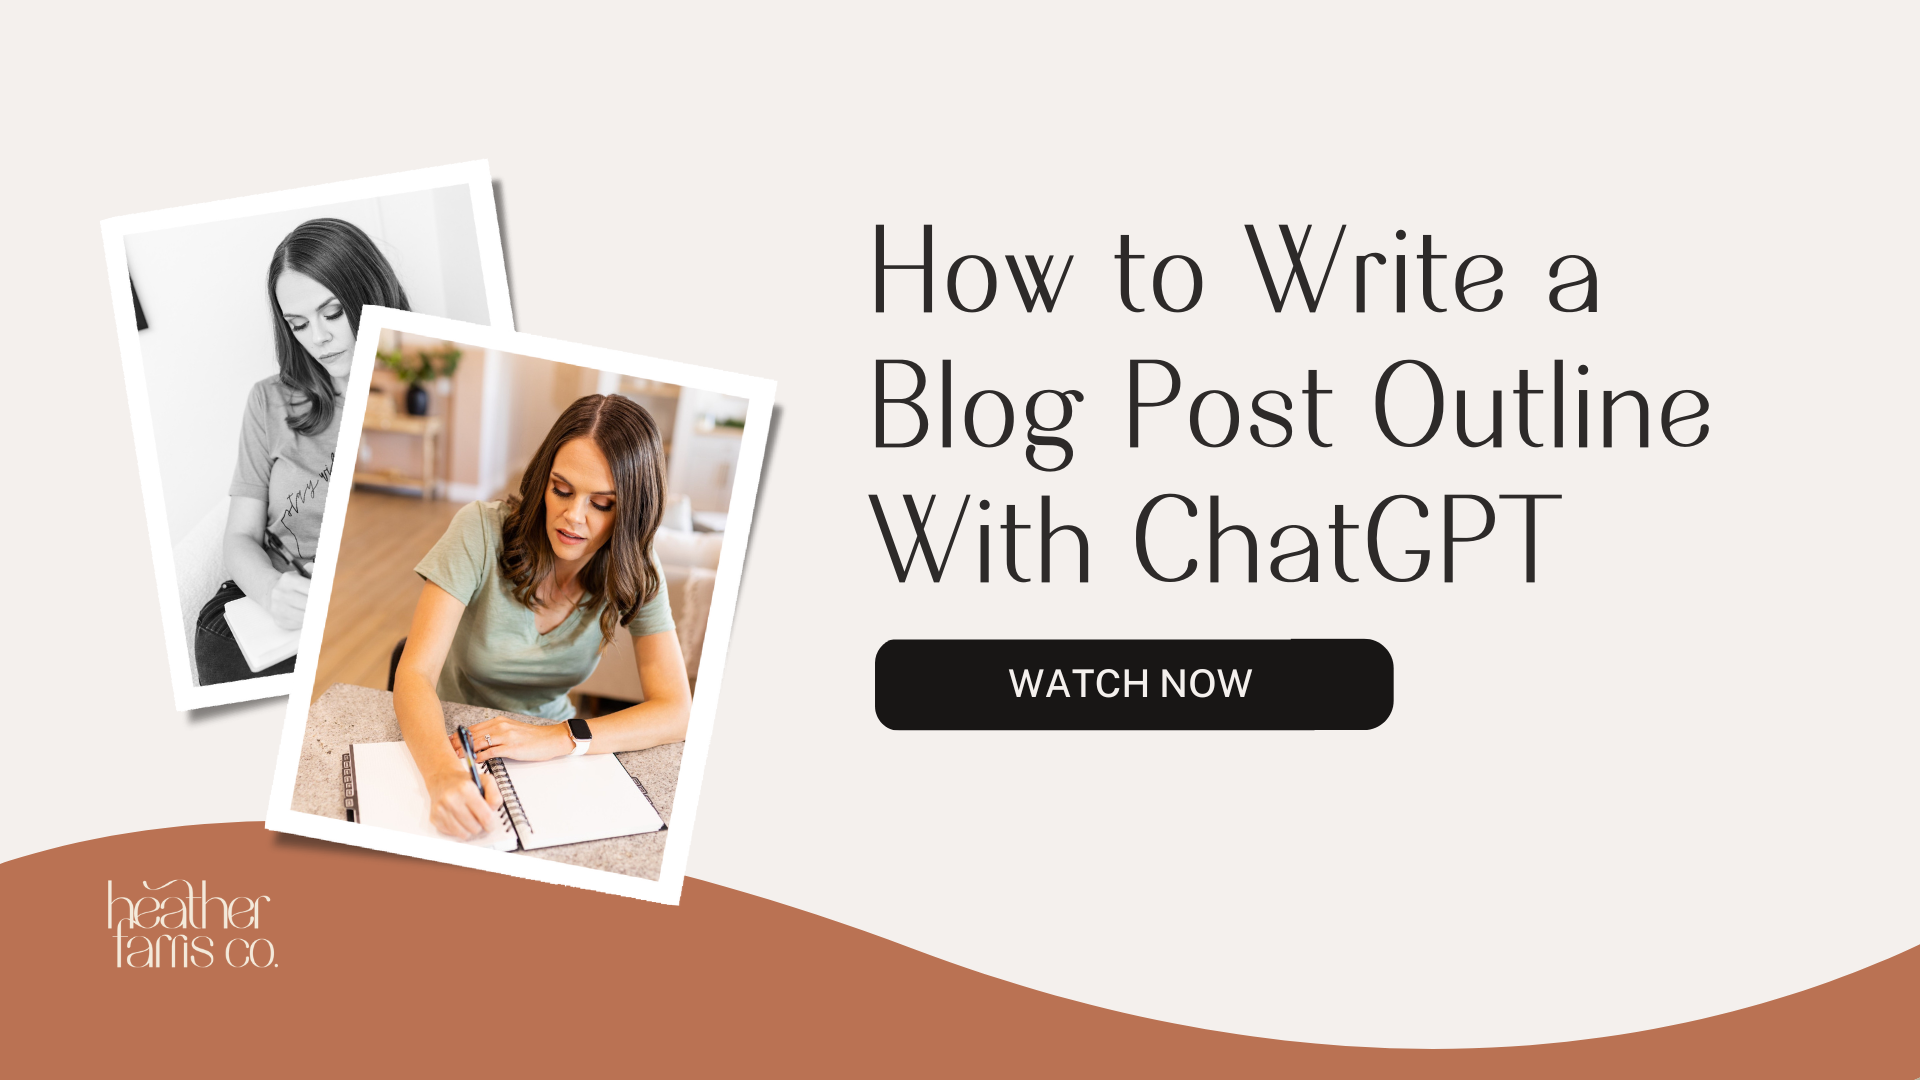 How to Write a Blog Post Outline With ChatGPT